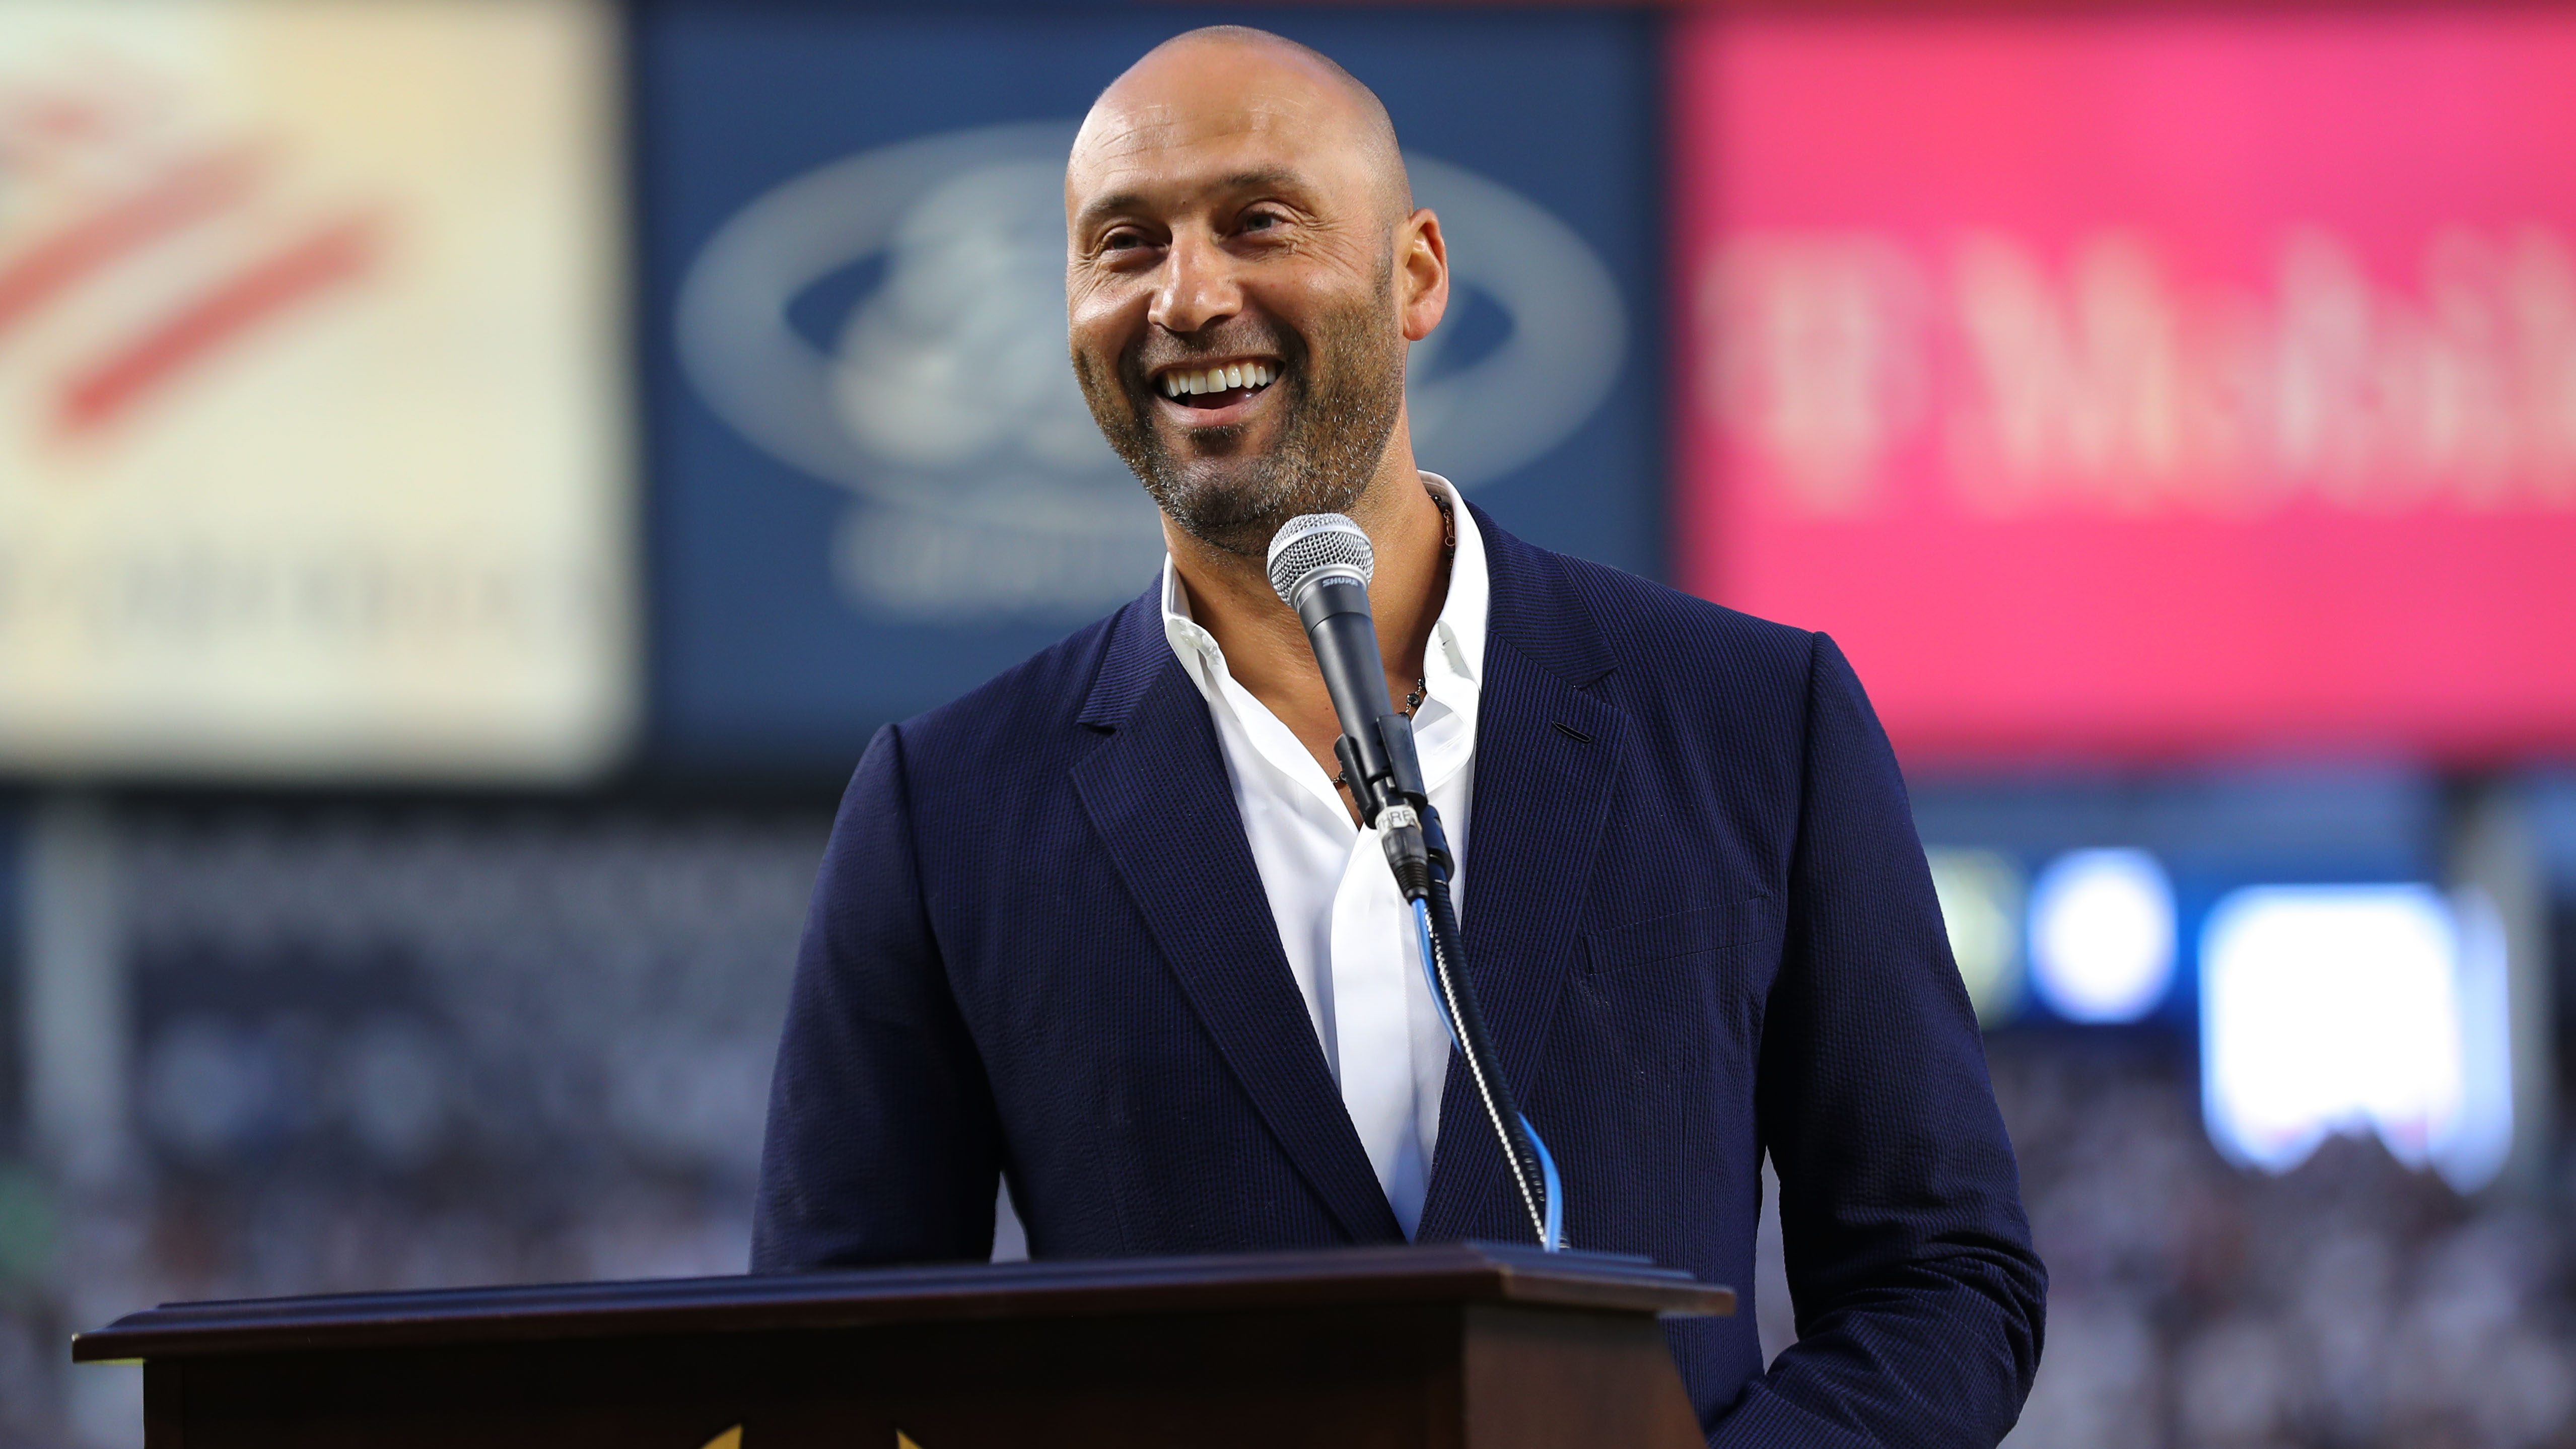 New York Yankees Hall Of Fame Derek Jeter Thank You For The